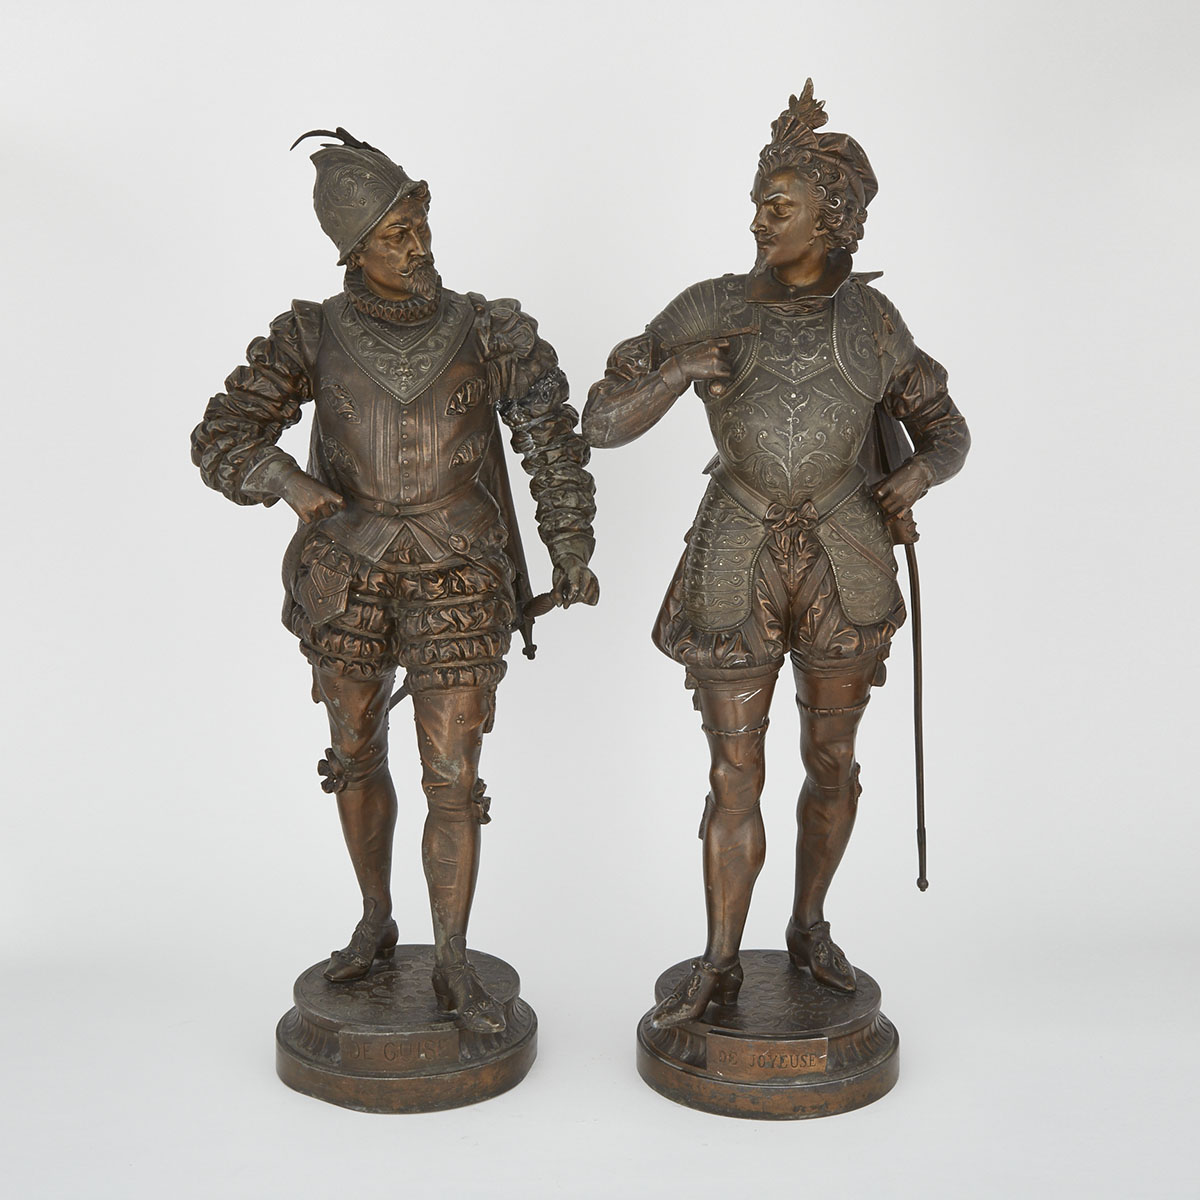 Large Pair of French Patinated White Metal Figures of the Ducs de Joyeuse and de Guise, late 19th century